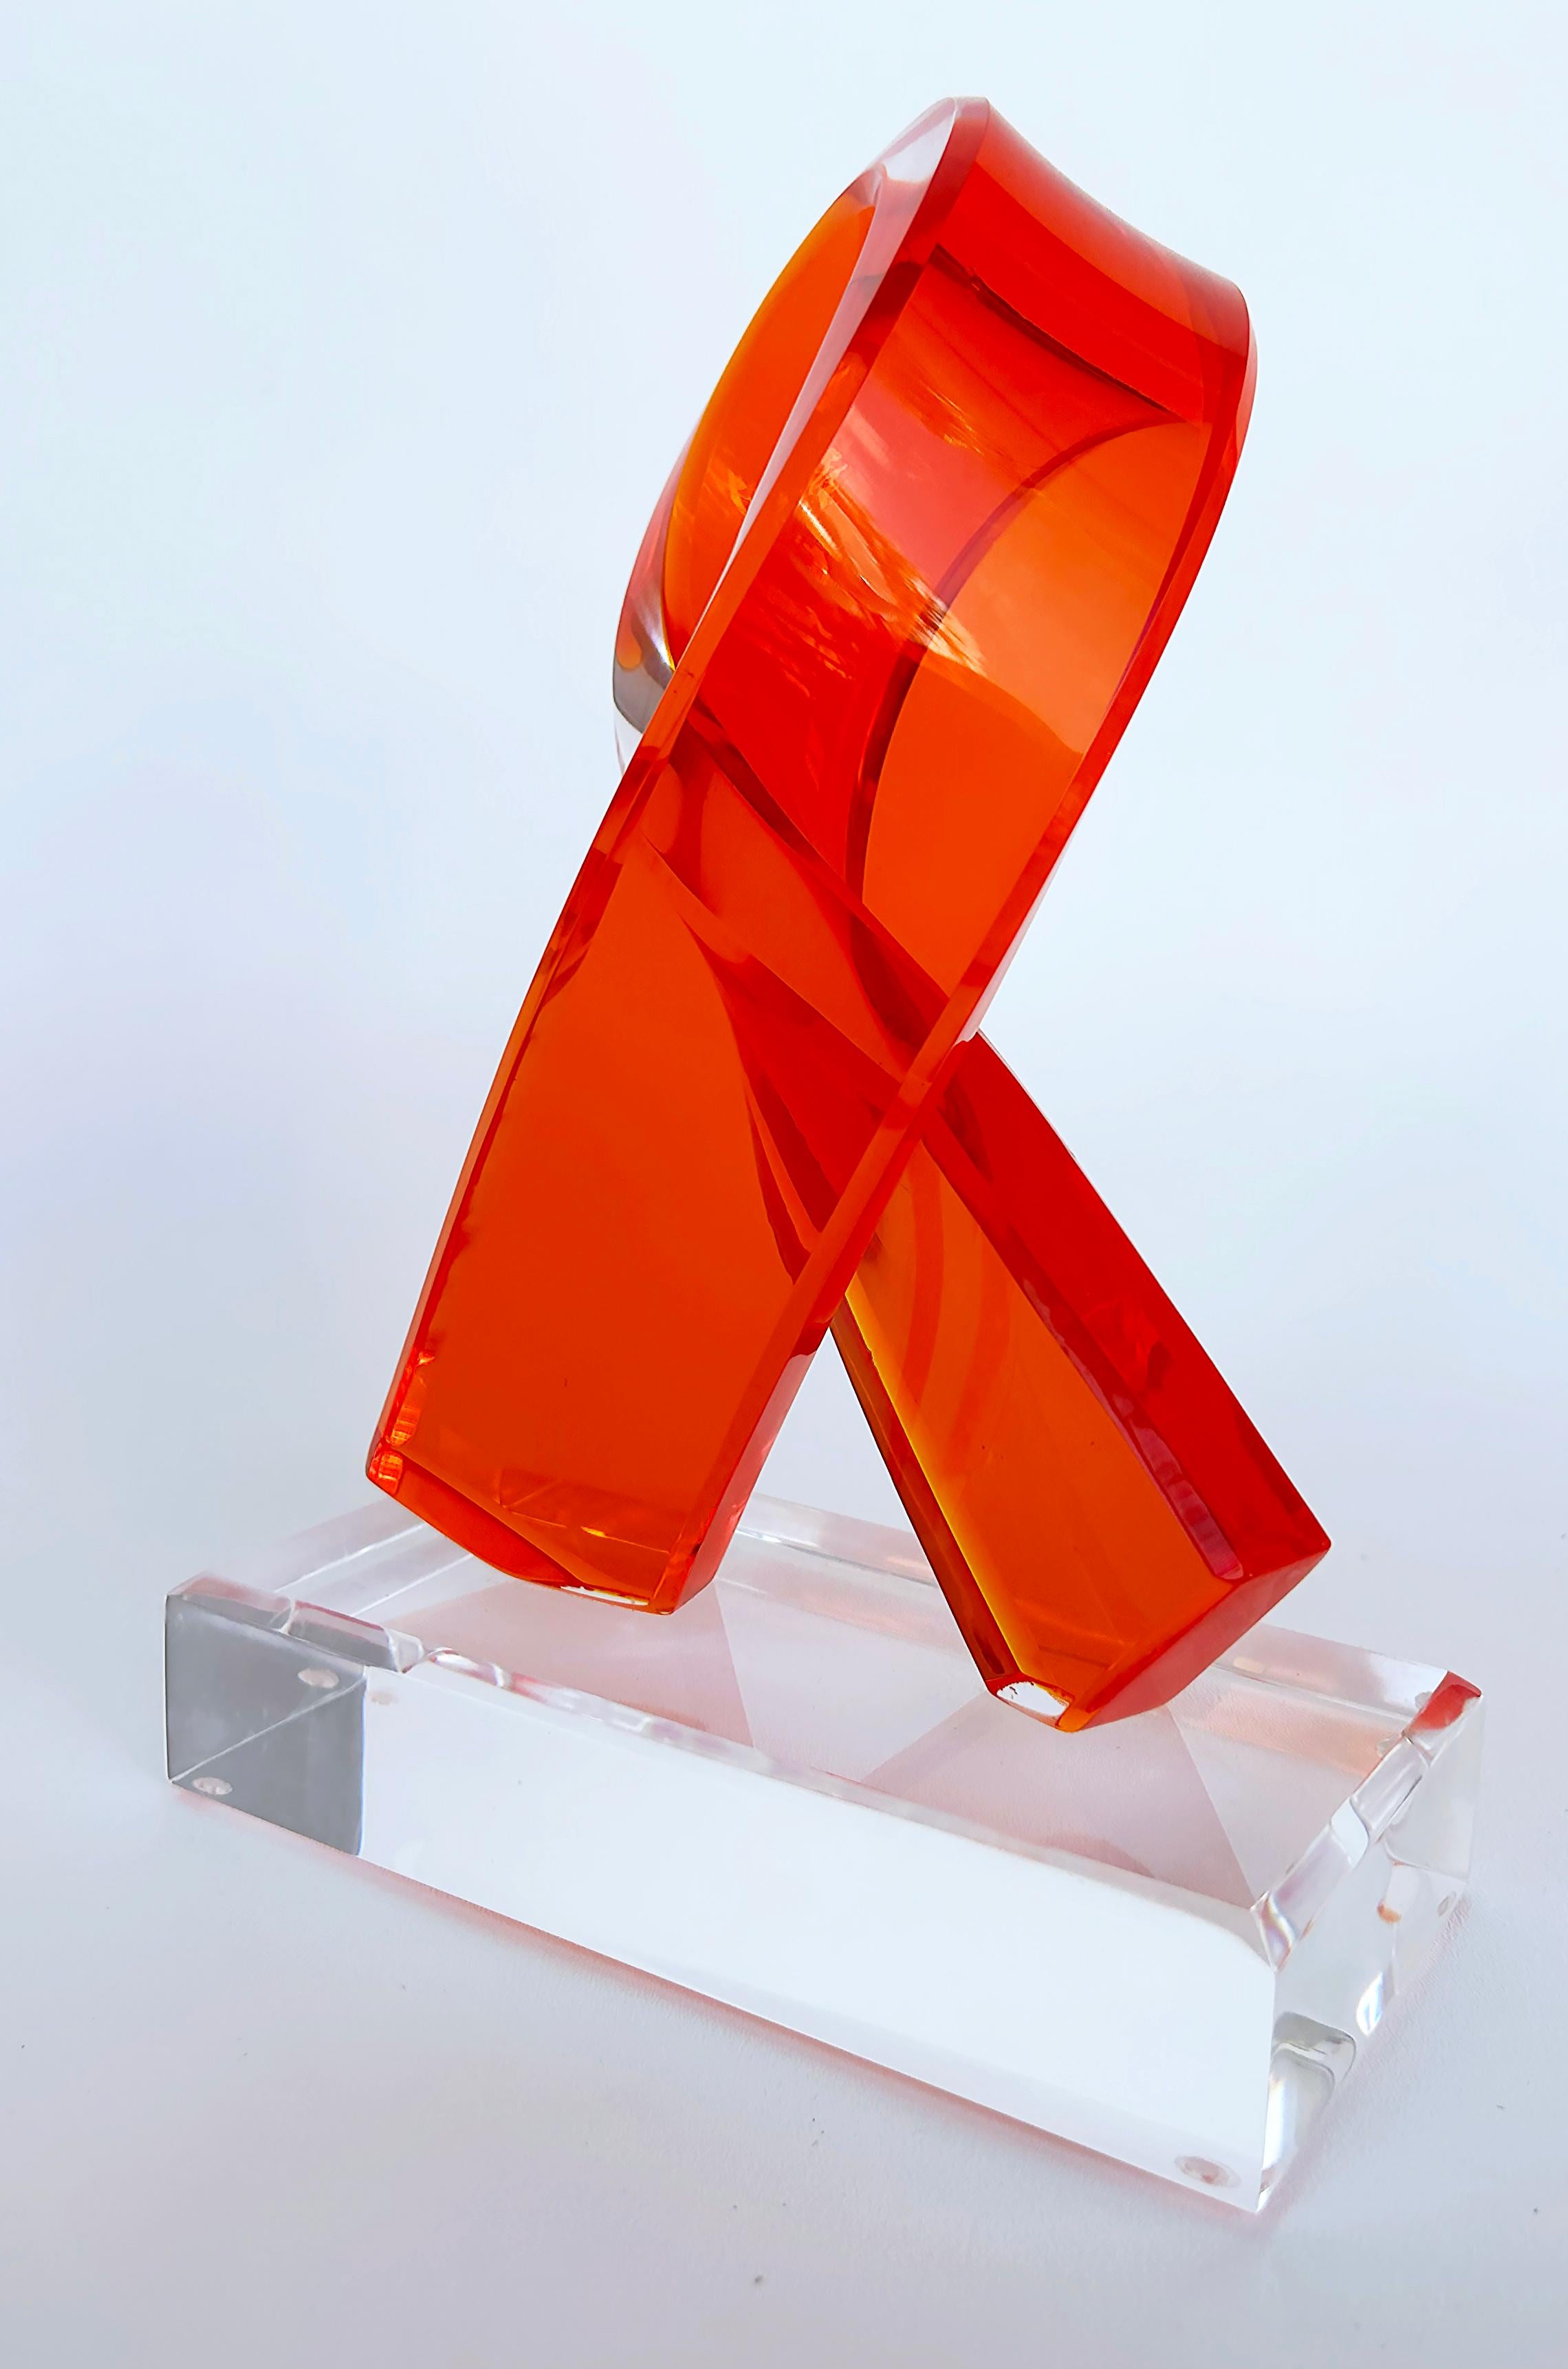 Custom Twisted Lucite Table Sculpture on Base

Offered for sale is a custom-made twisted Lucite table sculpture that is presented on a rectangular Lucite base. The sculptures can be custom-ordered in different shapes, sizes, and colors by contacting